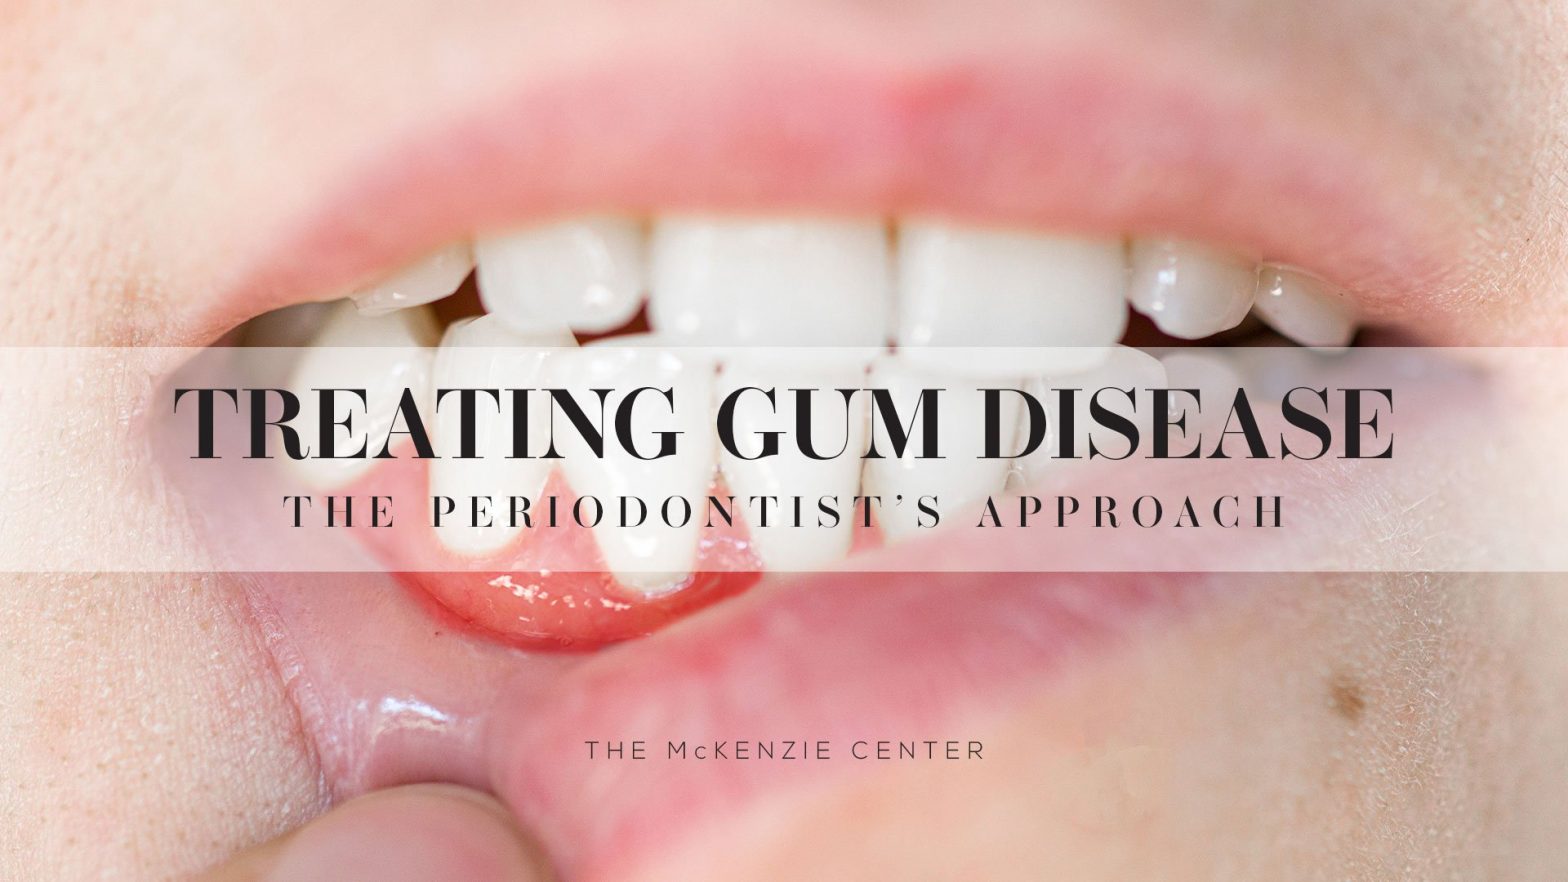 How do you fix gum disease on your teeth?